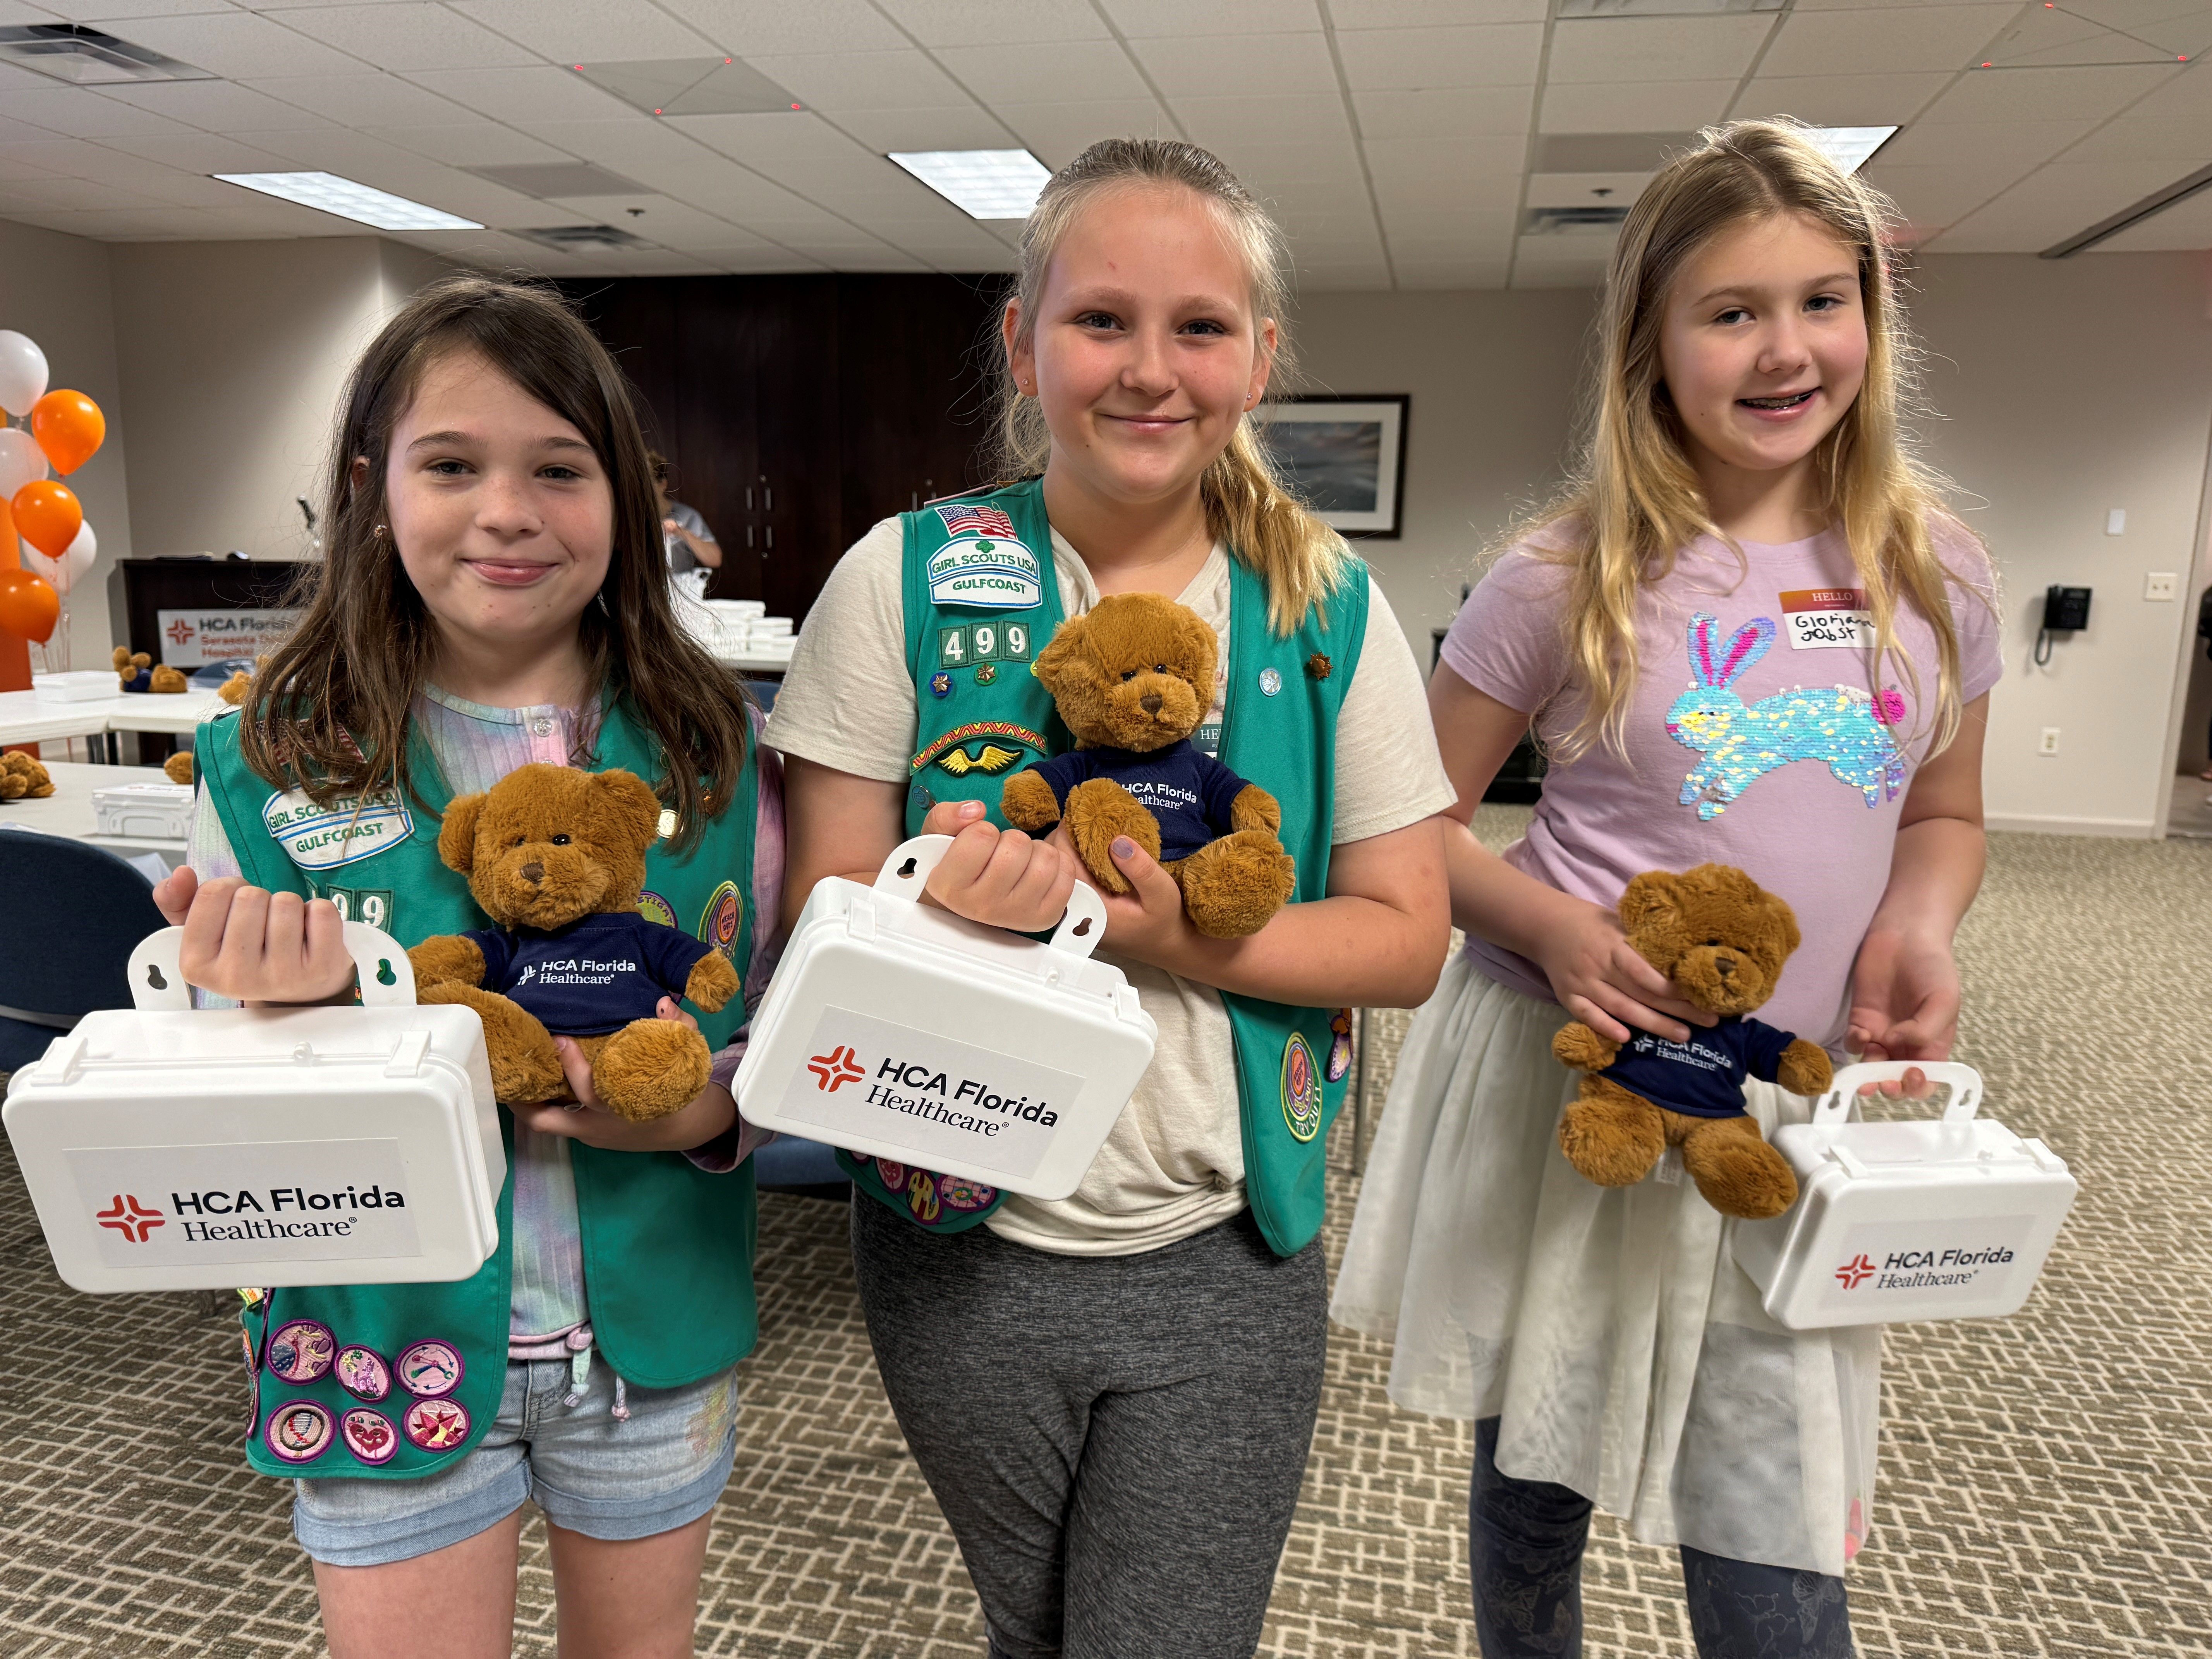 Three girl scouts stand smiling with first aid kits and teddy bears